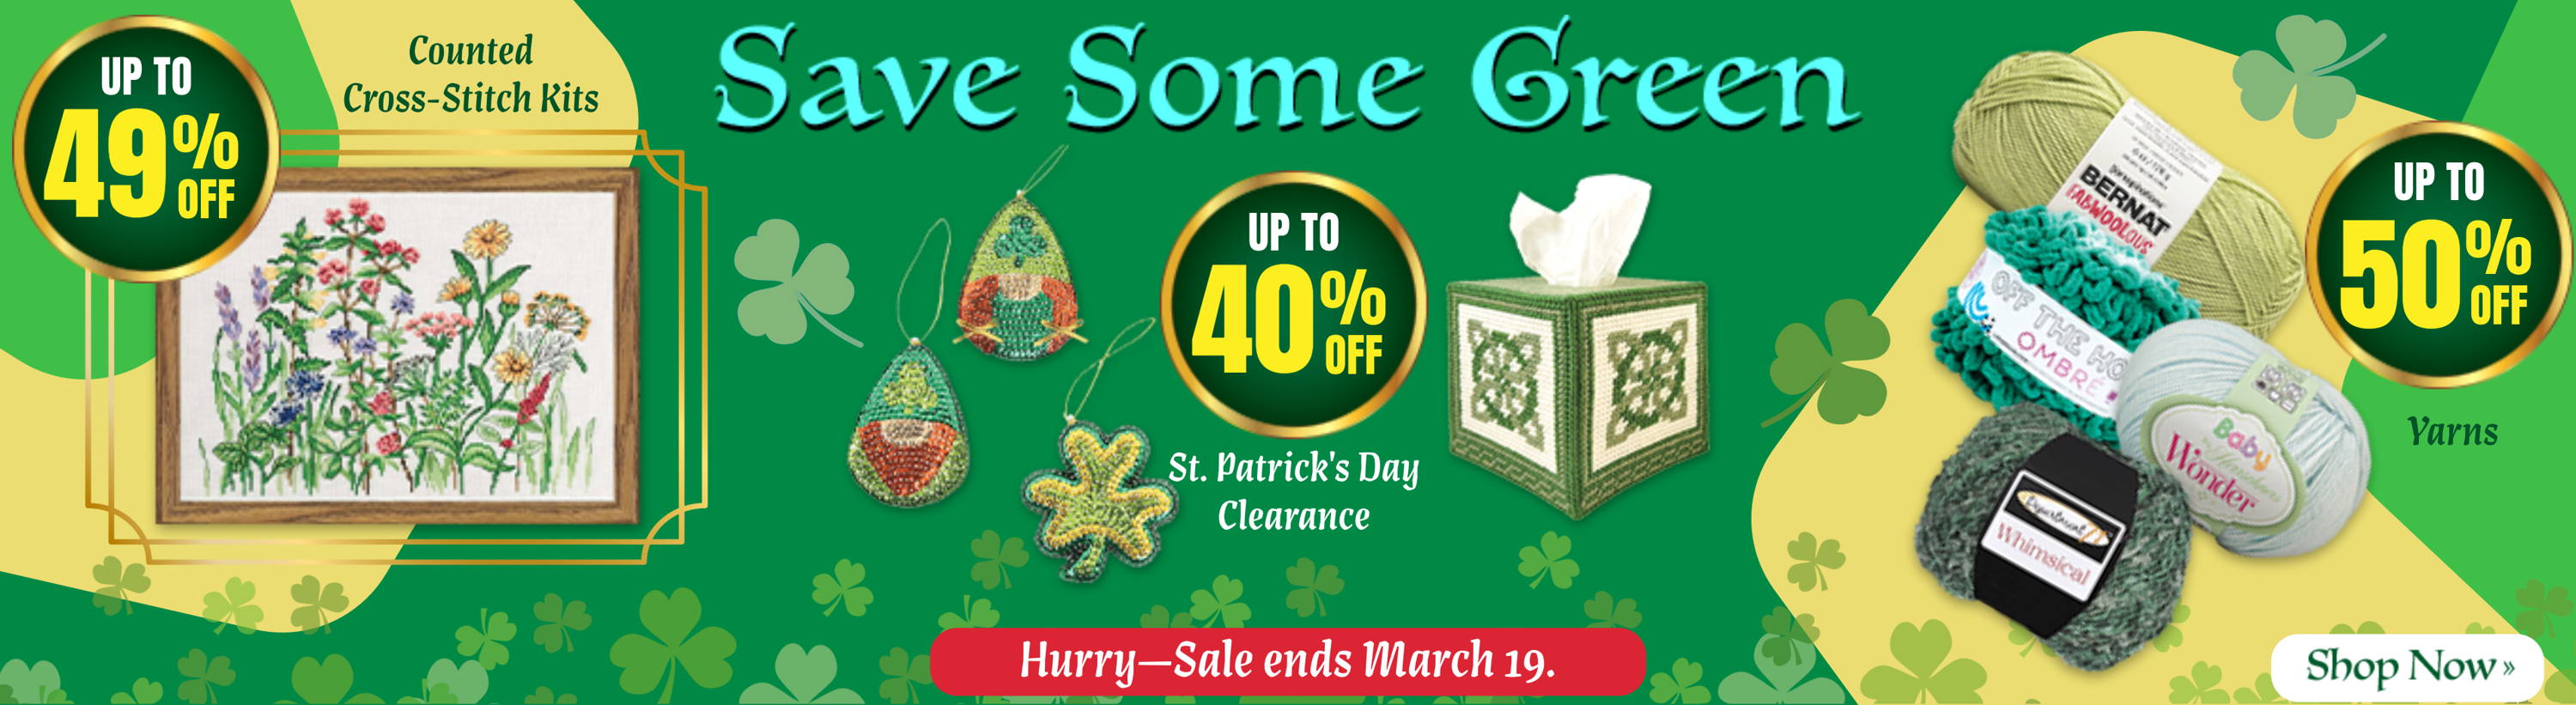 Save Some Green: Up to 49% Off of Counted Cross-Stitch. Up to 40% Off of St. Patrick's Day Clearance. Up to 50% Off of Yarns. Hurry - Sale ends March 19. Shop Now.